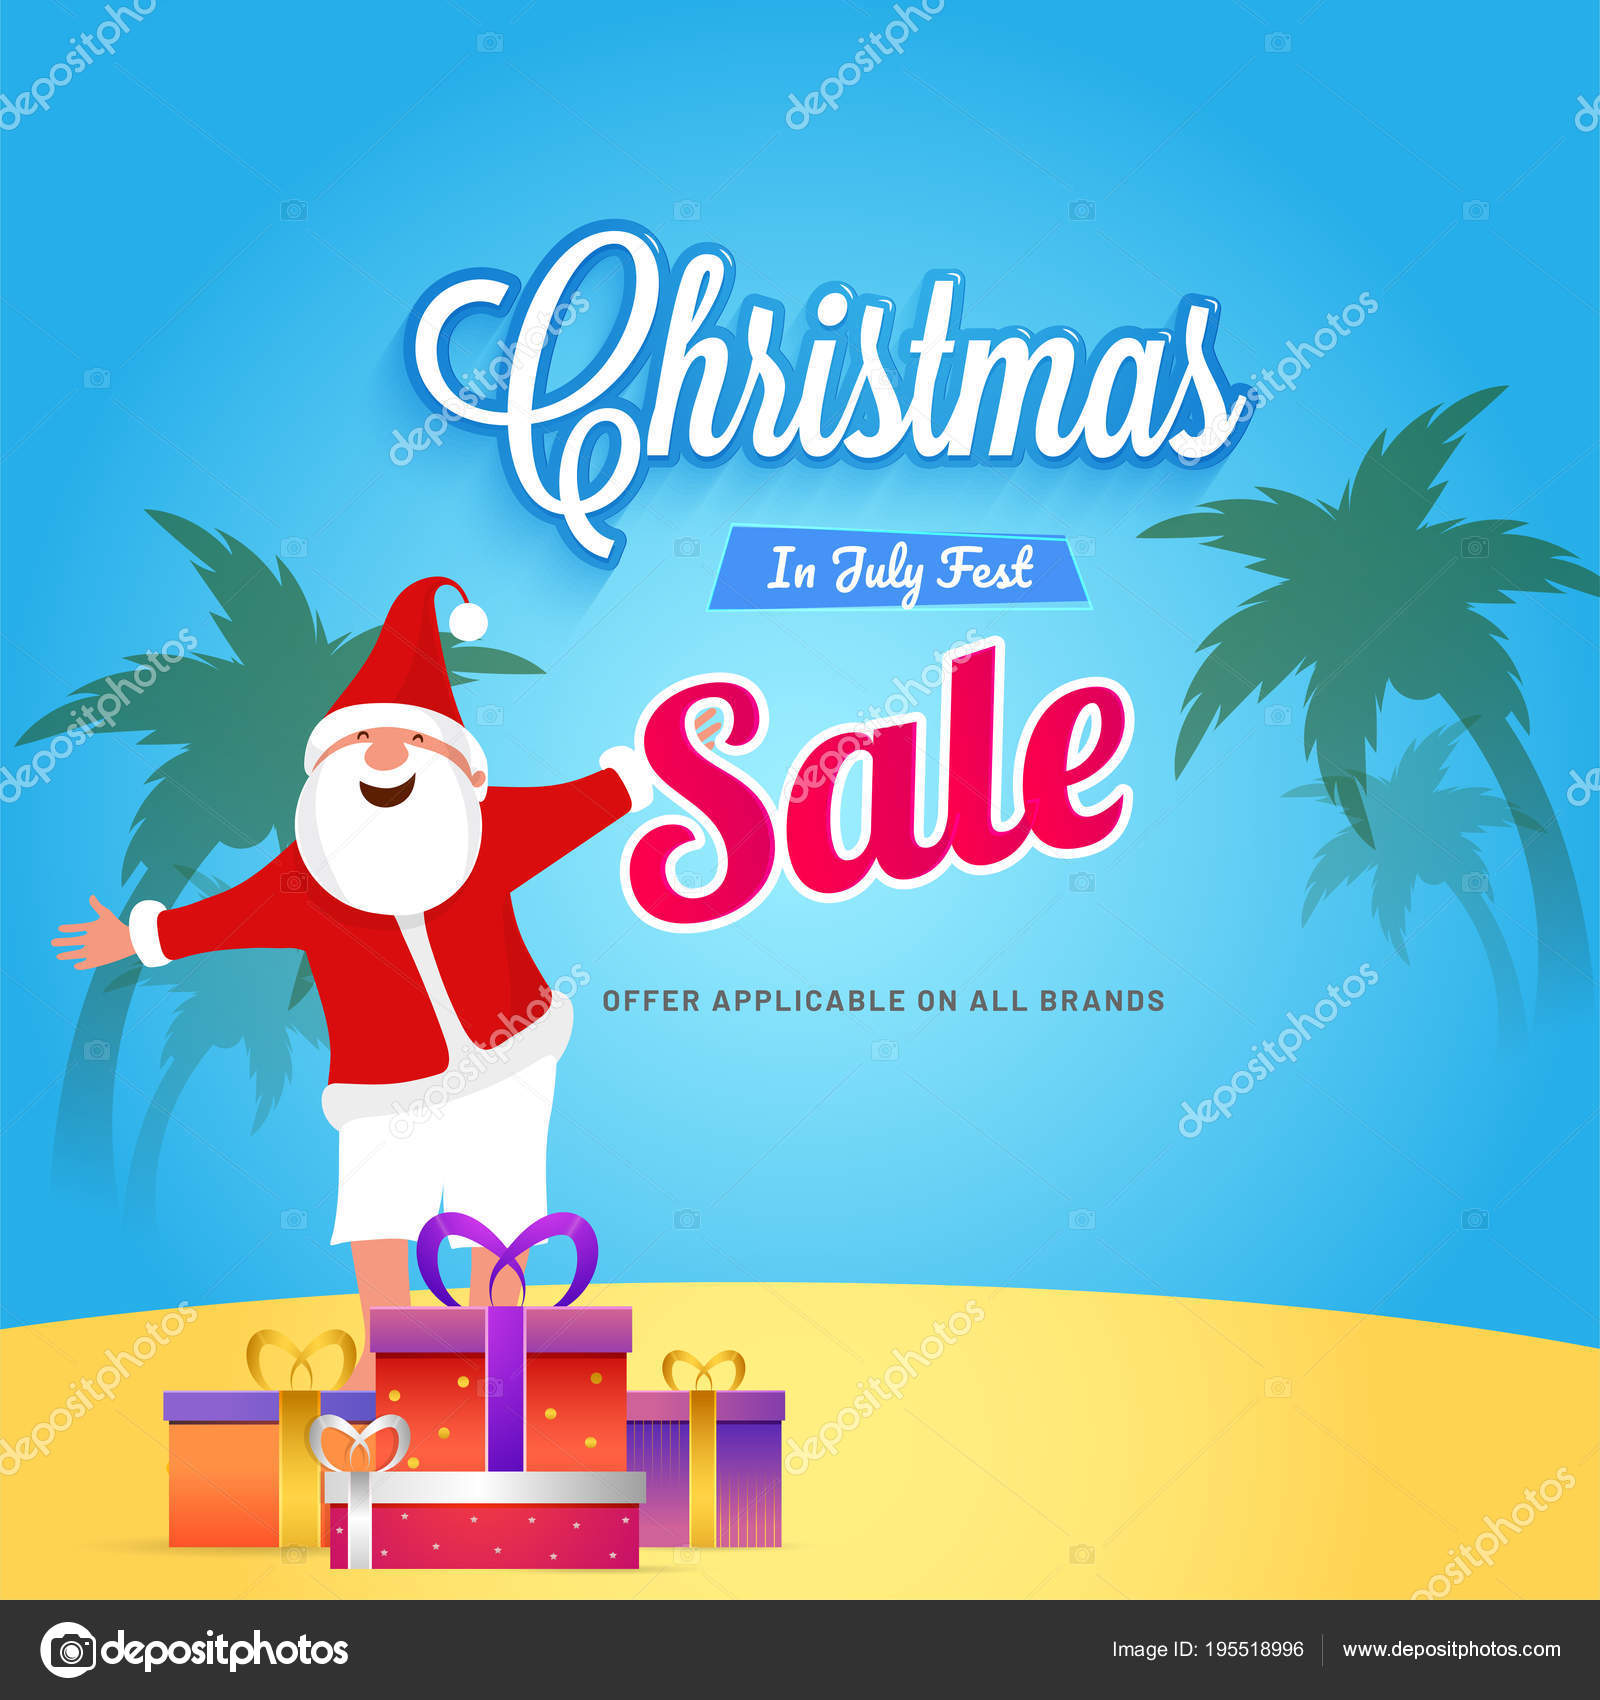 Download Christmas In July Fest Poster Banner Or Flyer Design Stock Vector C Alliesinteract 195518996 SVG Cut Files